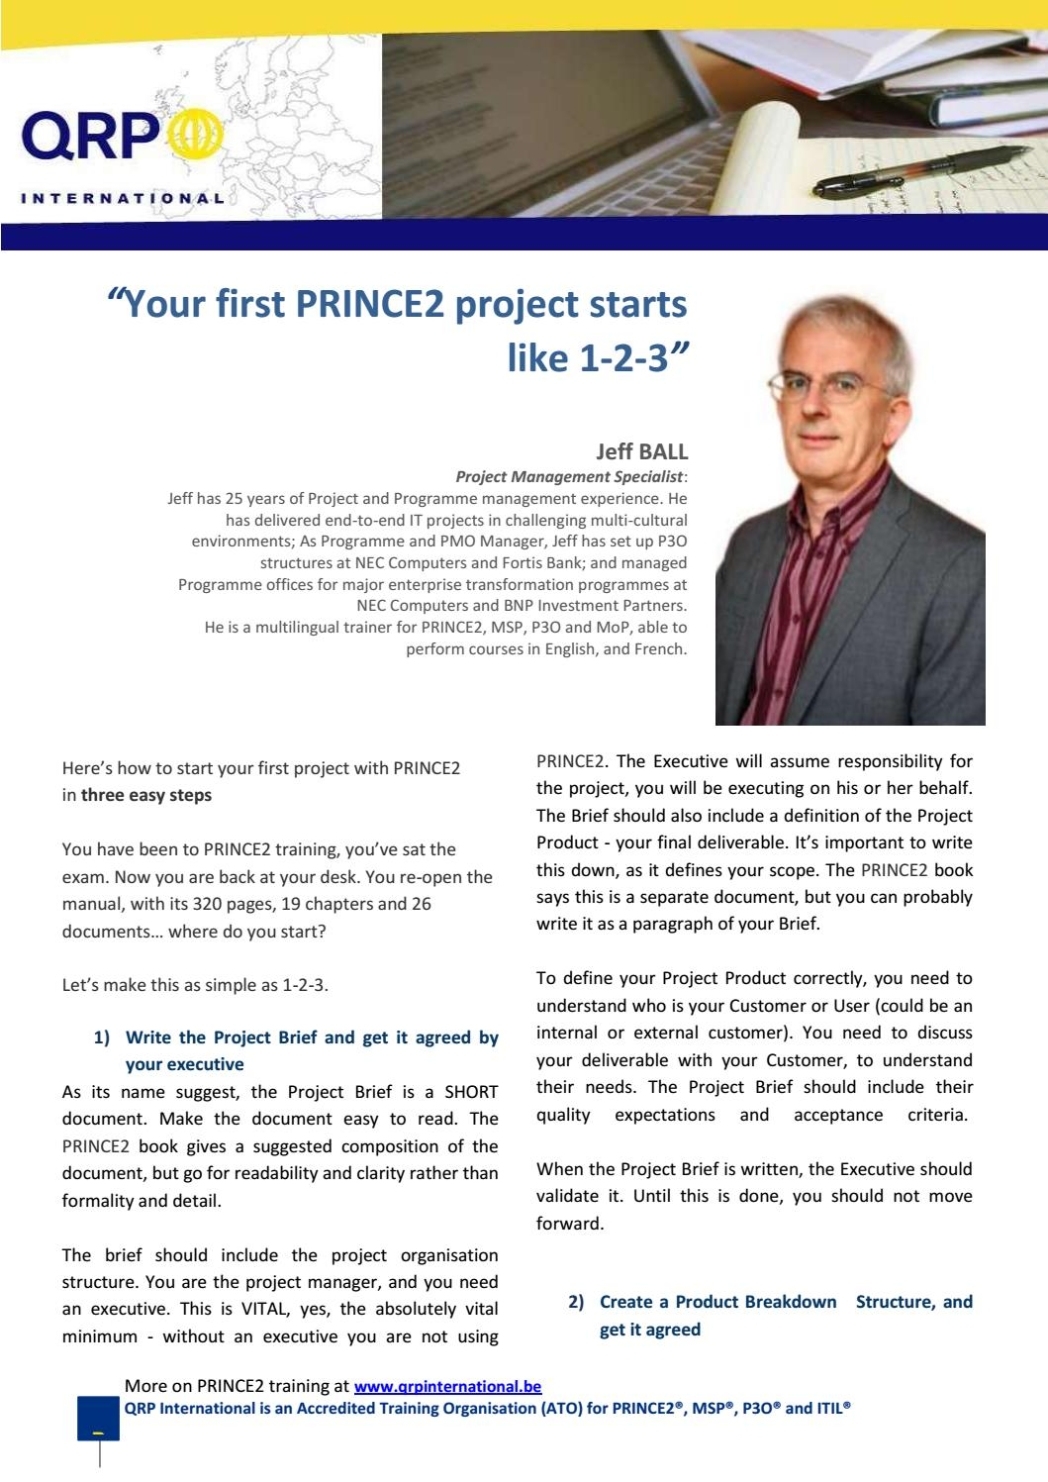 Project Definition Document Prince2 - Free Online Document intended for Prince2 Business Case Template Word